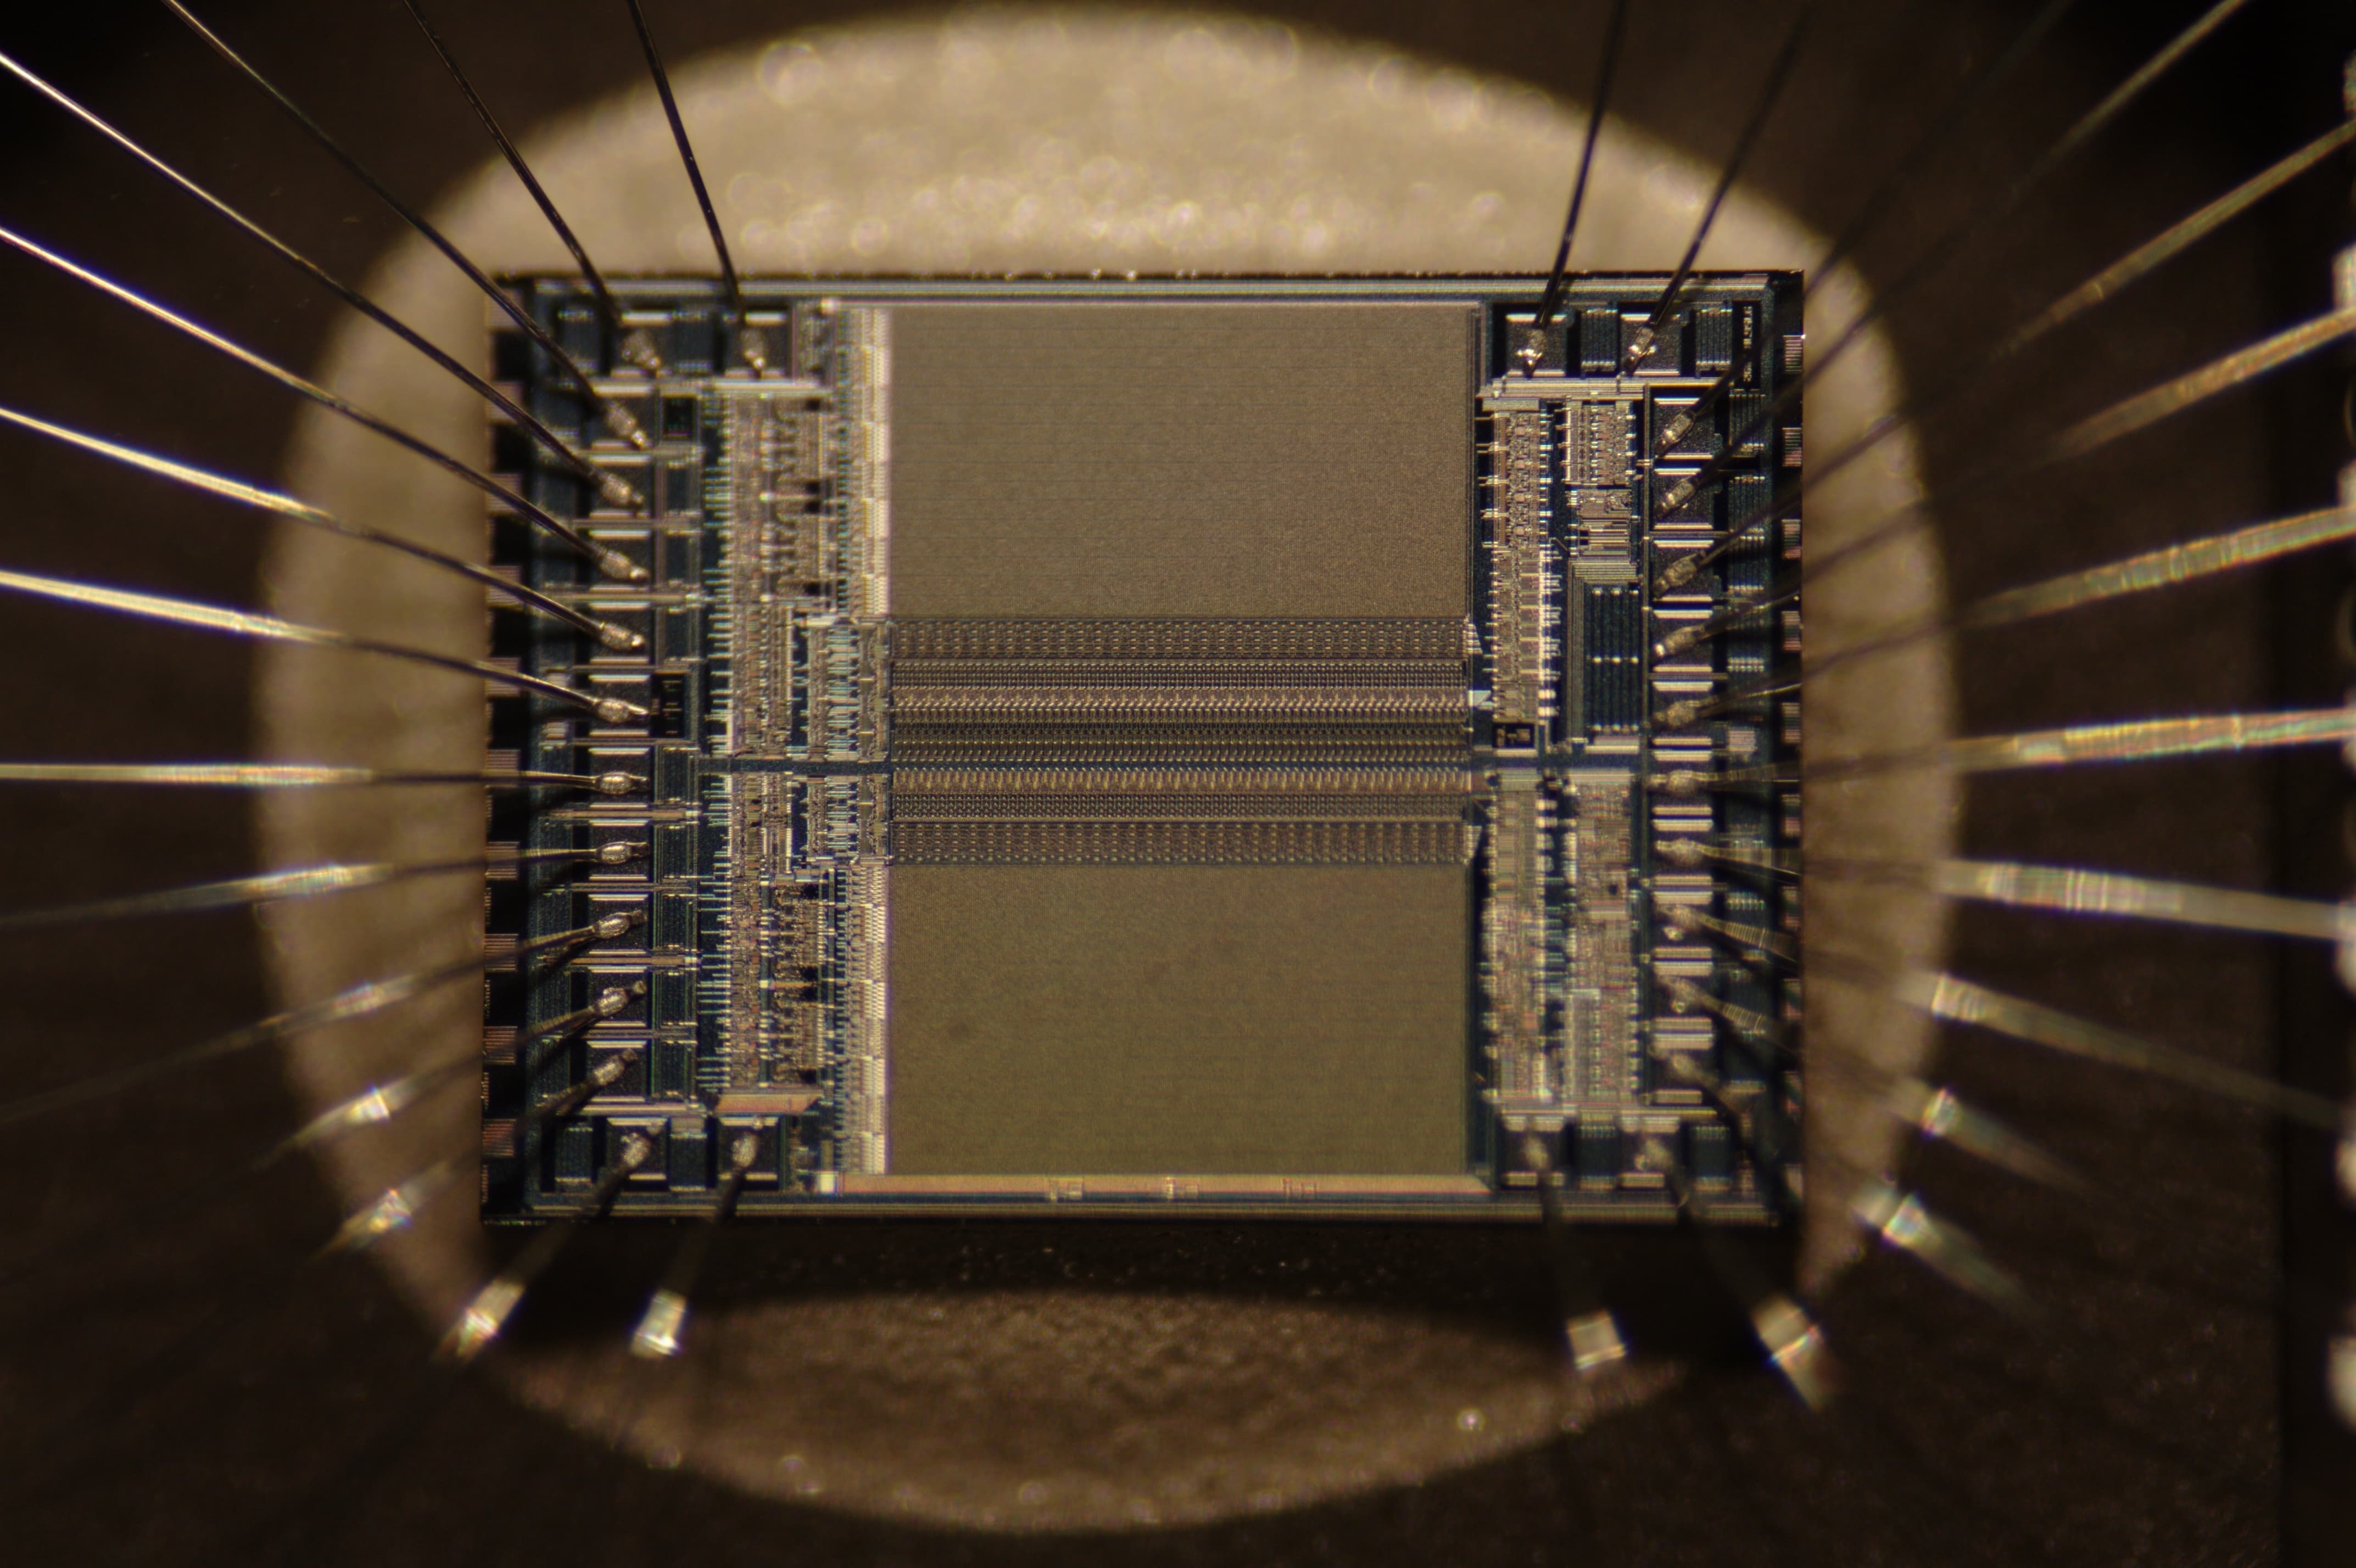 A macro shot showing the fine detail of the integrated circuit inside one EPROM chip